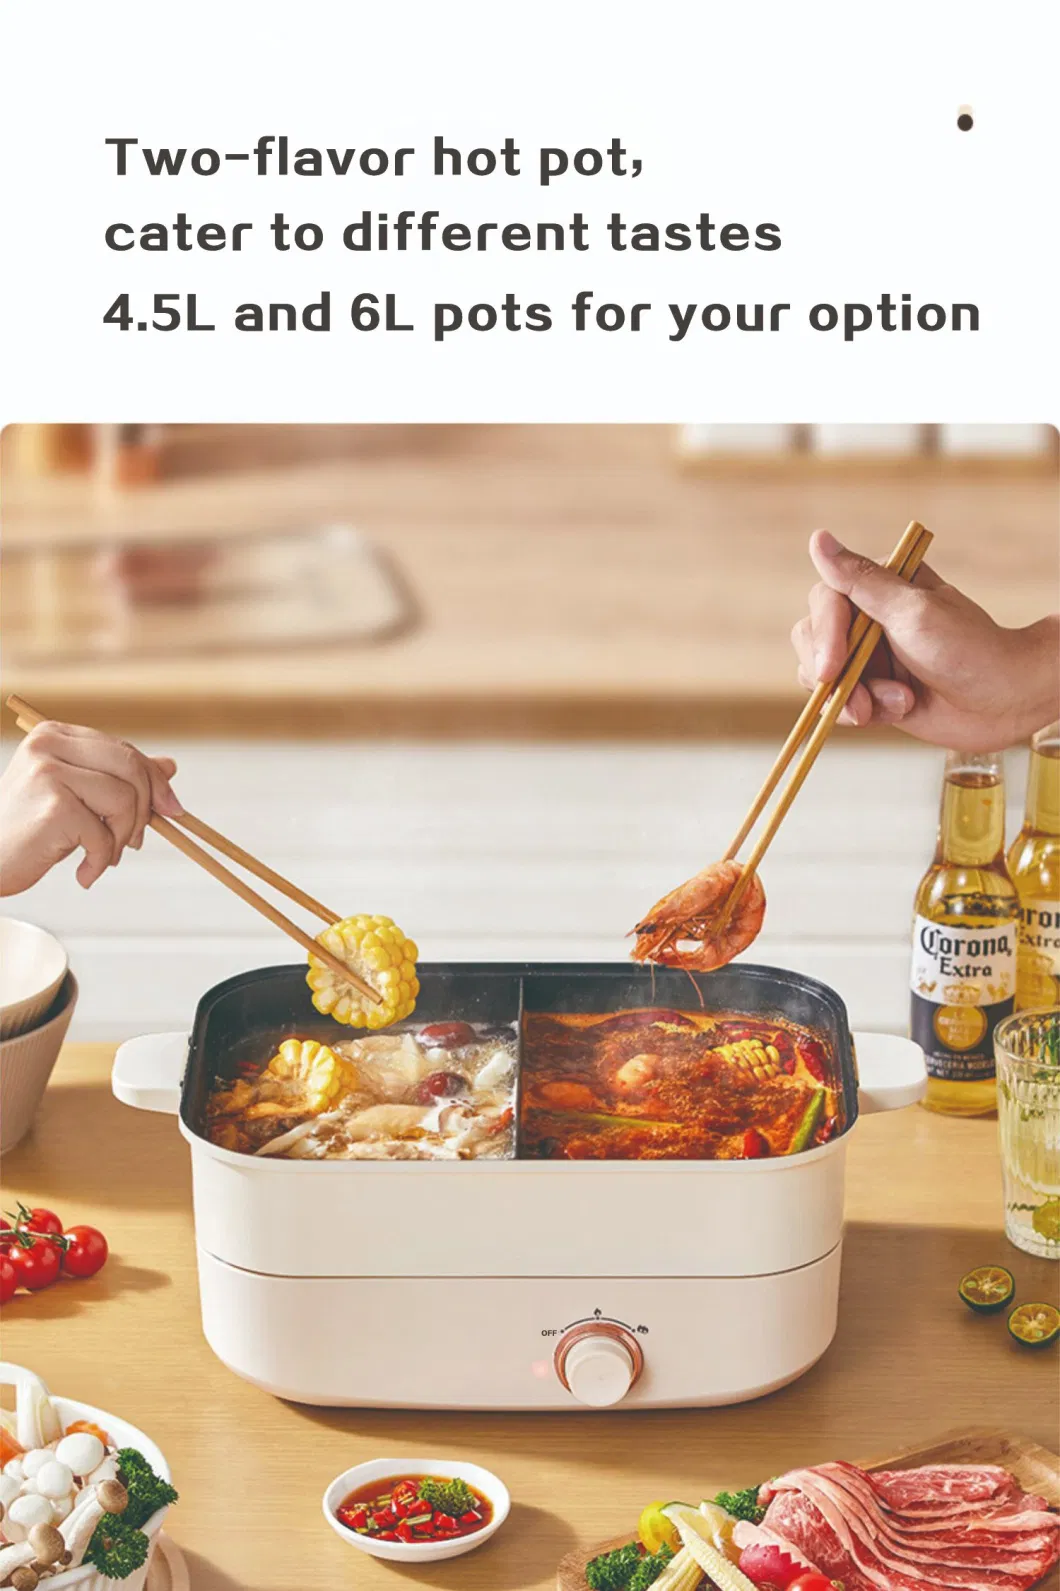 4.5L/6L Multifunction Electric Cooking Pot with Separable Inner Pot, Multi-Cooker Electric Pot